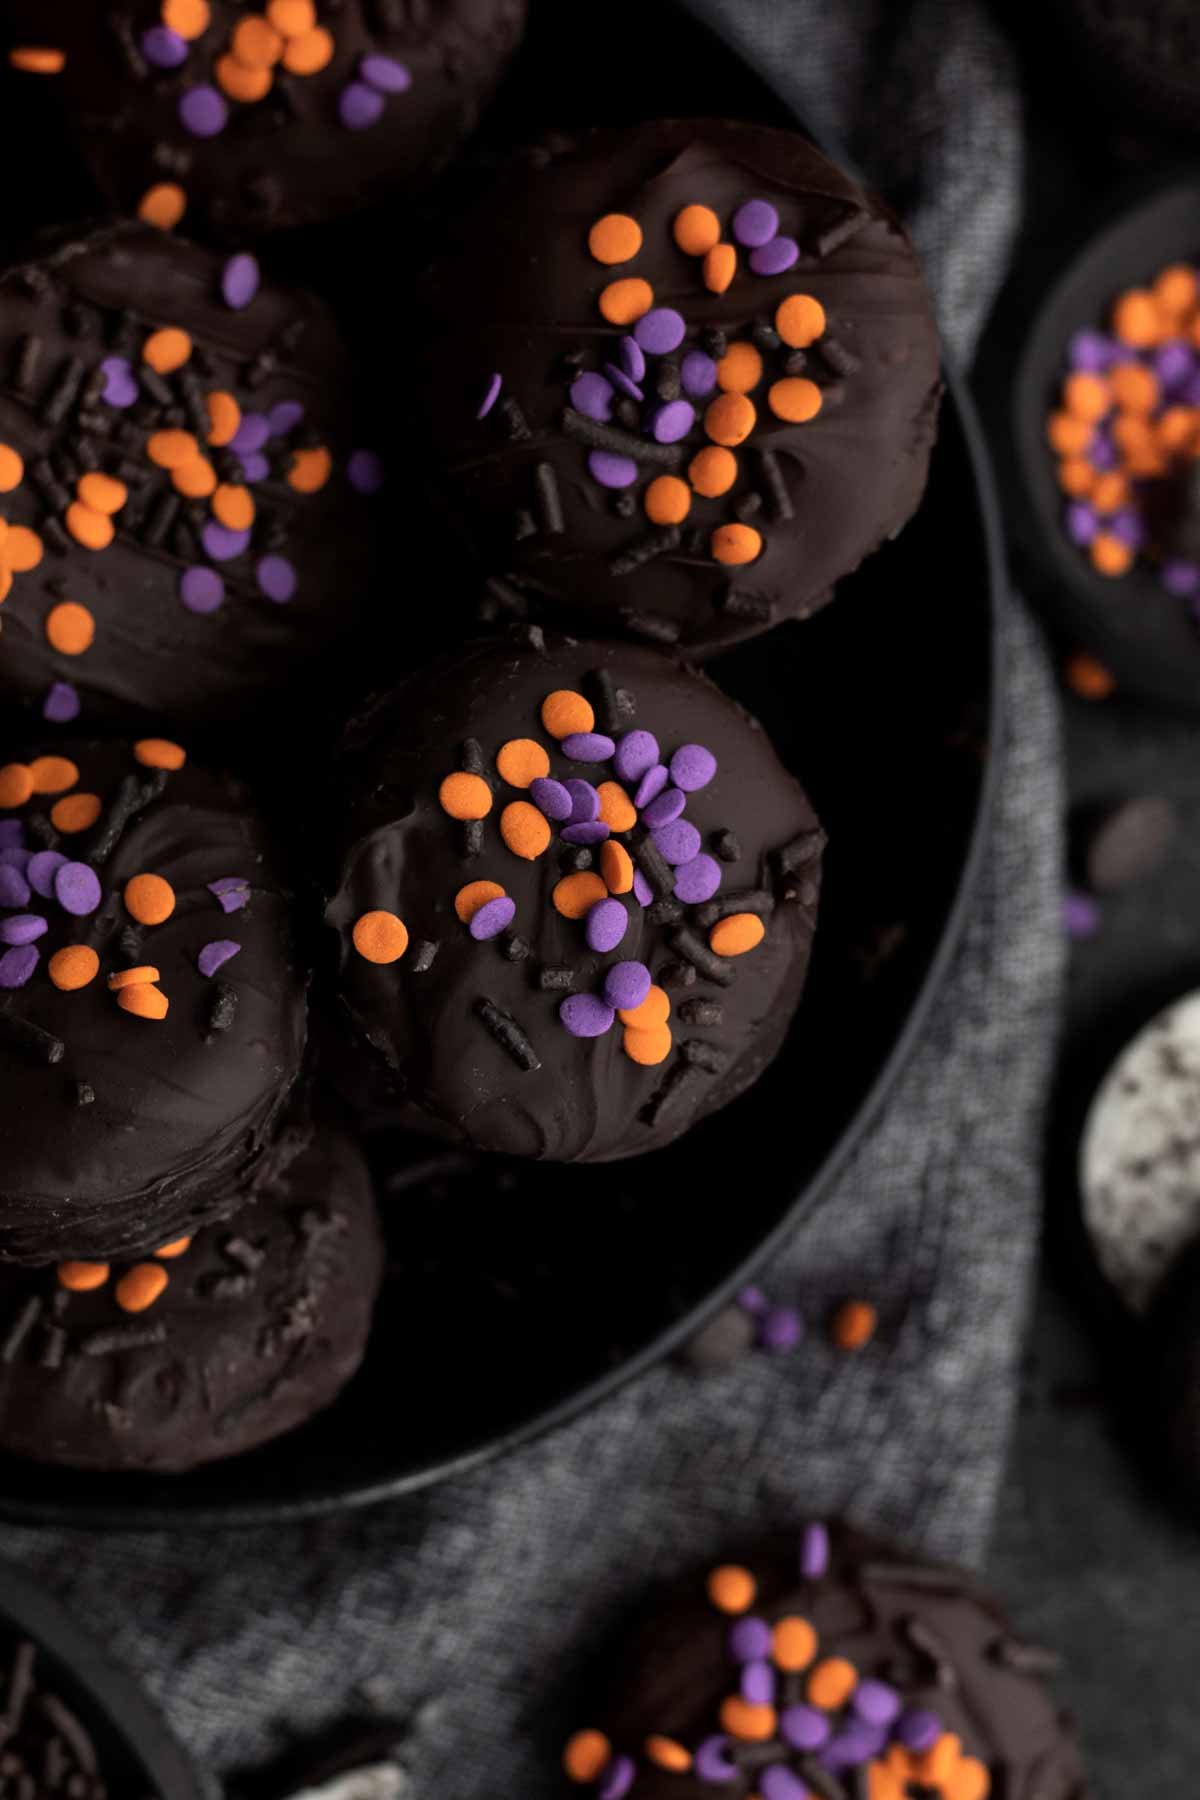 A plate of chocolate covered Oreos with sprinkles.